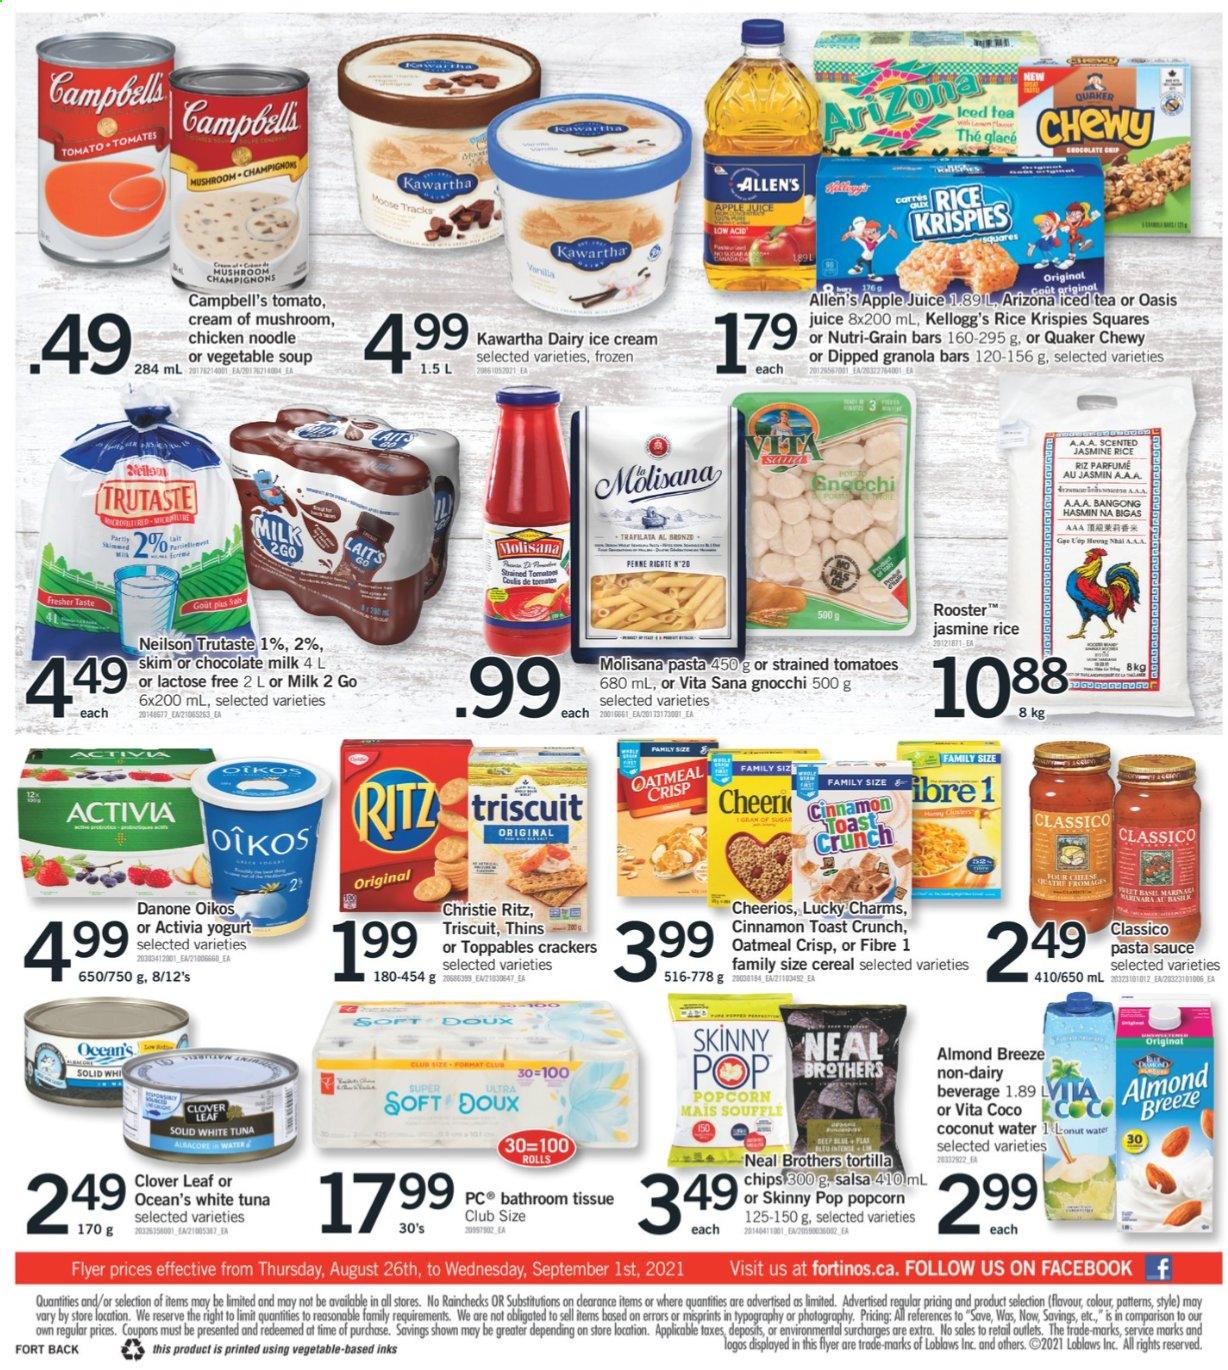 thumbnail - Fortinos Flyer - August 26, 2021 - September 01, 2021 - Sales products - tomatoes, tuna, Campbell's, vegetable soup, pasta sauce, soup, sauce, Quaker, noodles, yoghurt, Clover, Activia, Oikos, milk, Almond Breeze, ice cream, milk chocolate, crackers, Kellogg's, RITZ, tortilla chips, Thins, popcorn, Skinny Pop, oatmeal, cereals, Cheerios, granola bar, Rice Krispies, Nutri-Grain, jasmine rice, penne, cinnamon, salsa, Classico, apple juice, juice, ice tea, coconut water, AriZona, BROTHERS, bath tissue, Danone, gnocchi. Page 2.